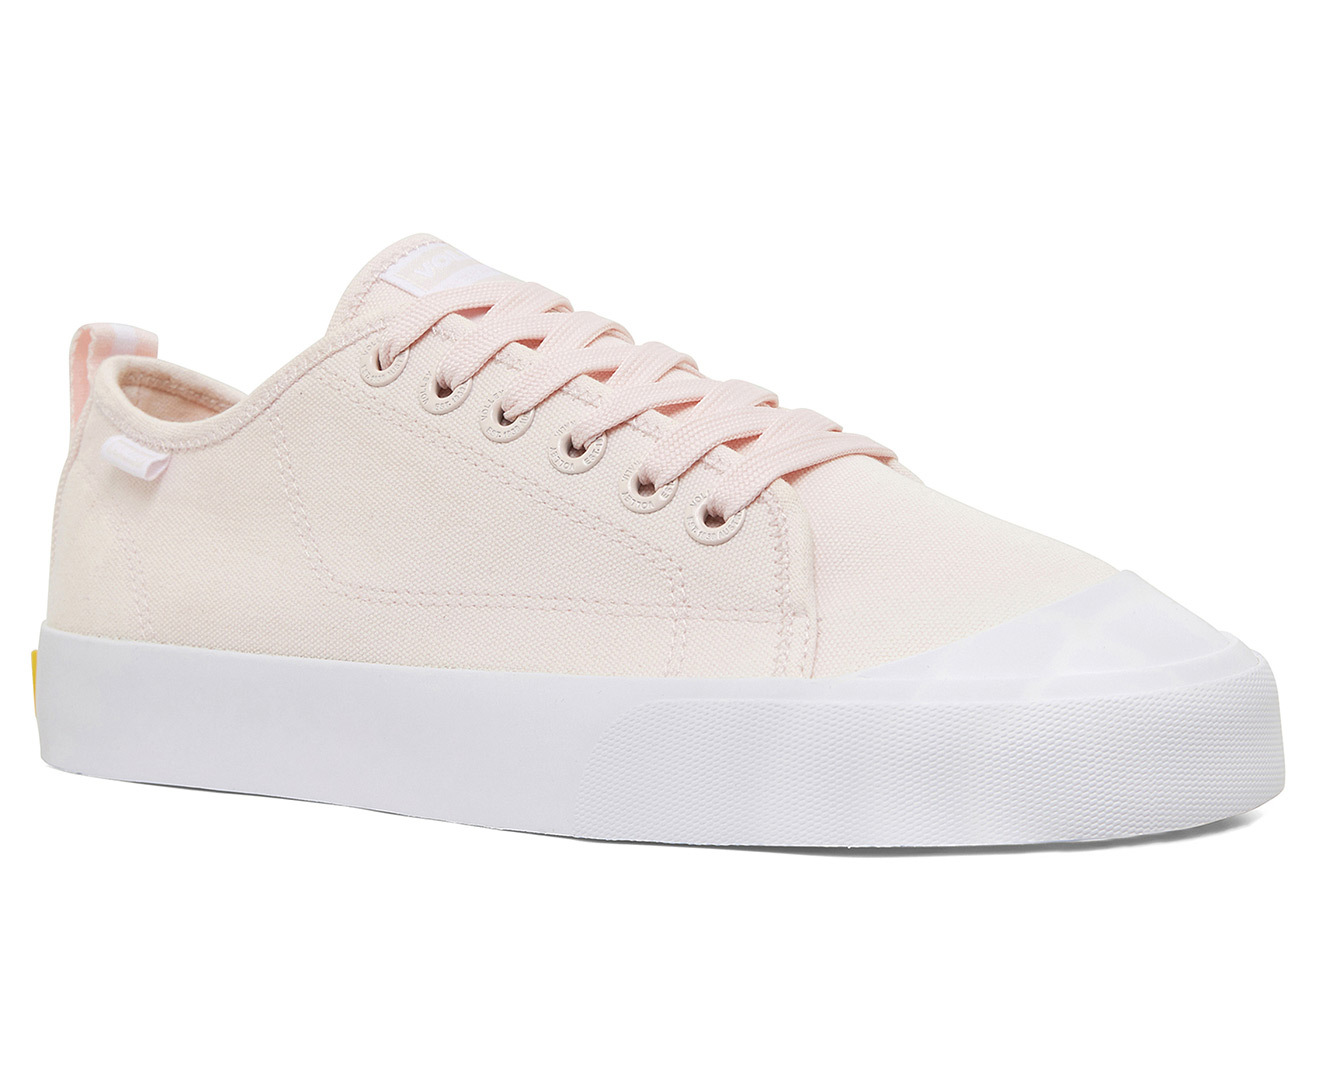 Volley Unisex Deuce Low Sneakers - Blush/White | Catch.co.nz